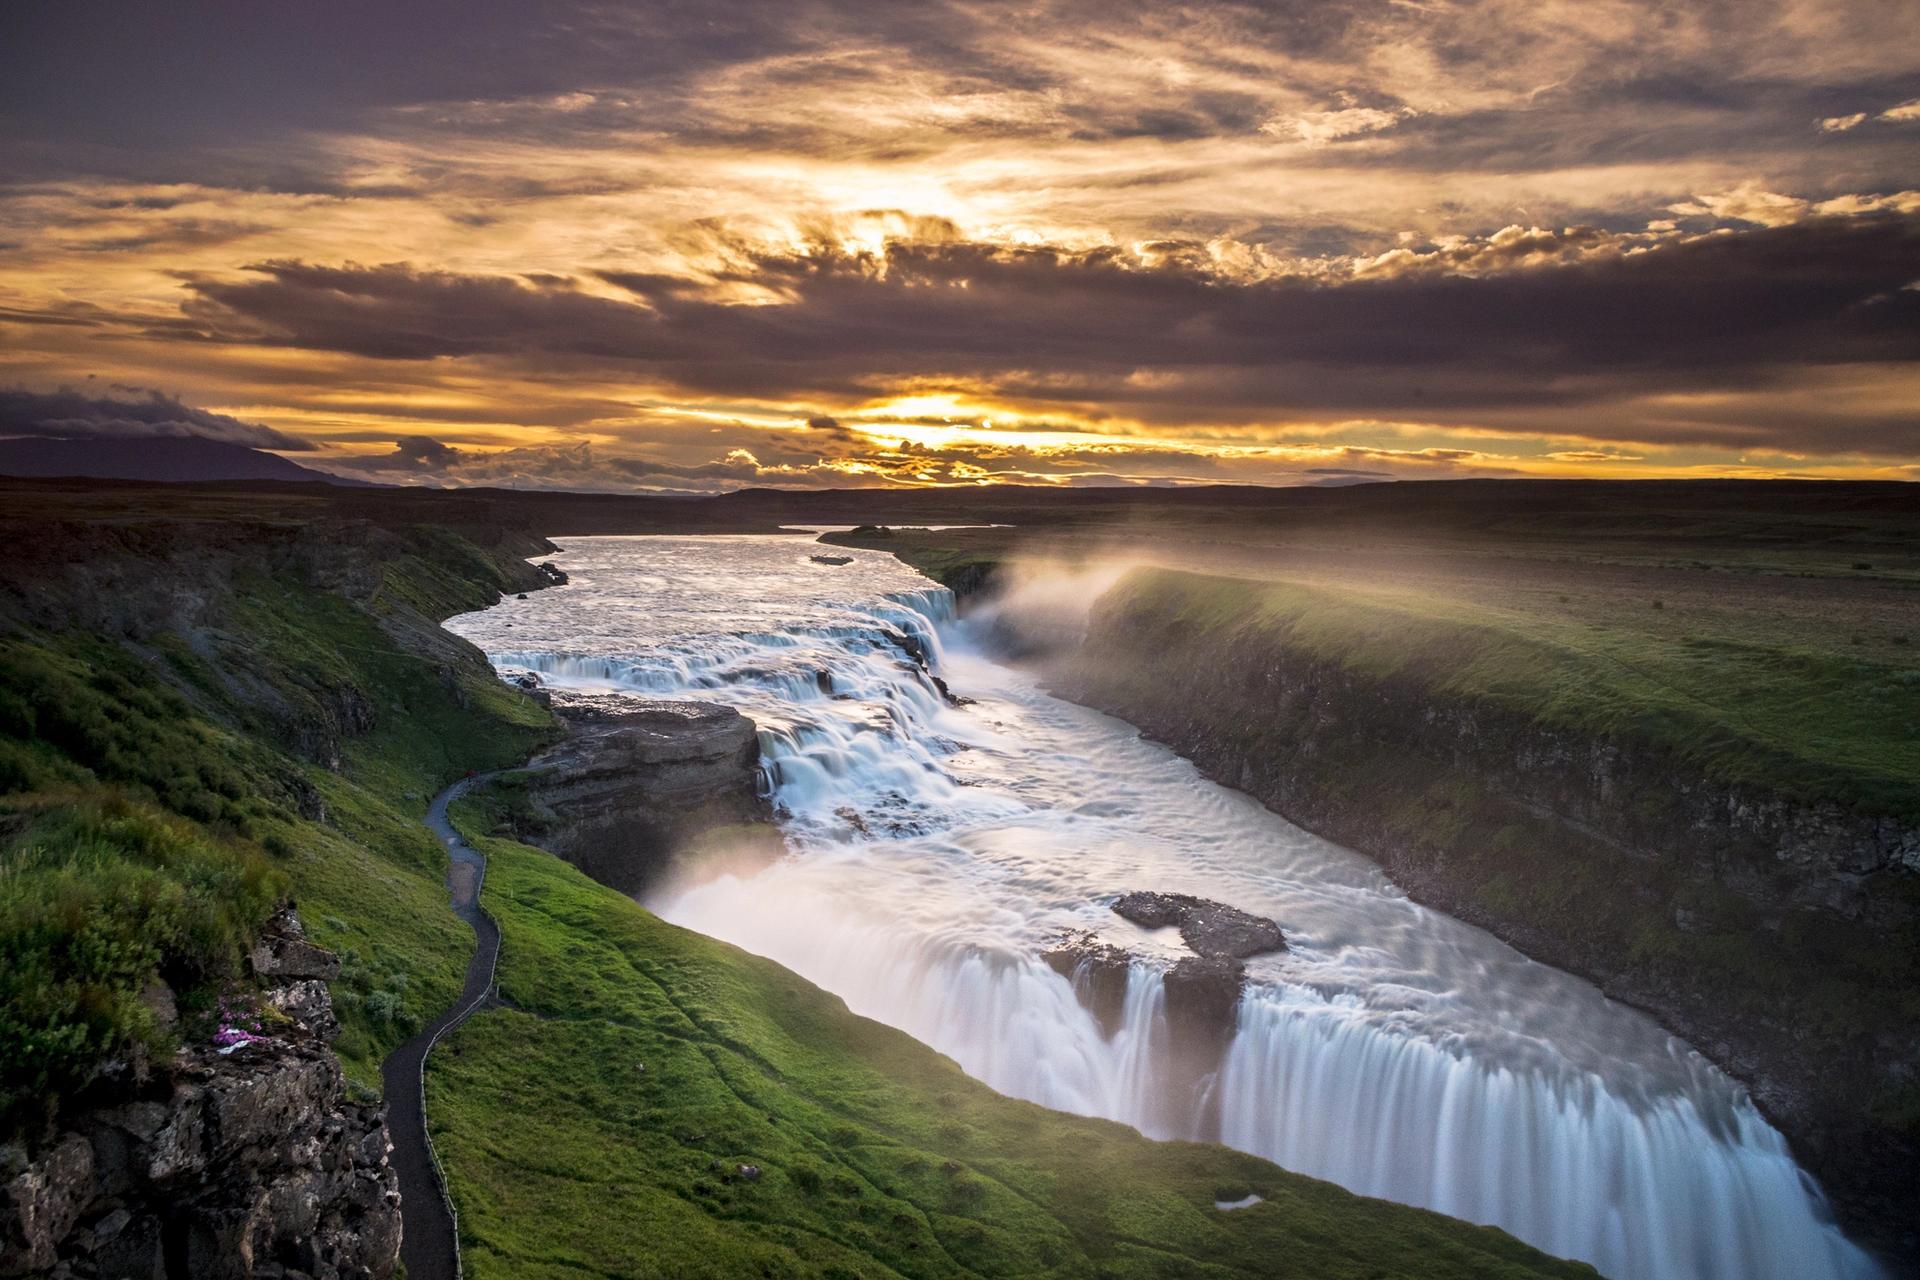 Gullfoss waterfall plunging into a deep canyon with misty rainbow and dramatic landscape